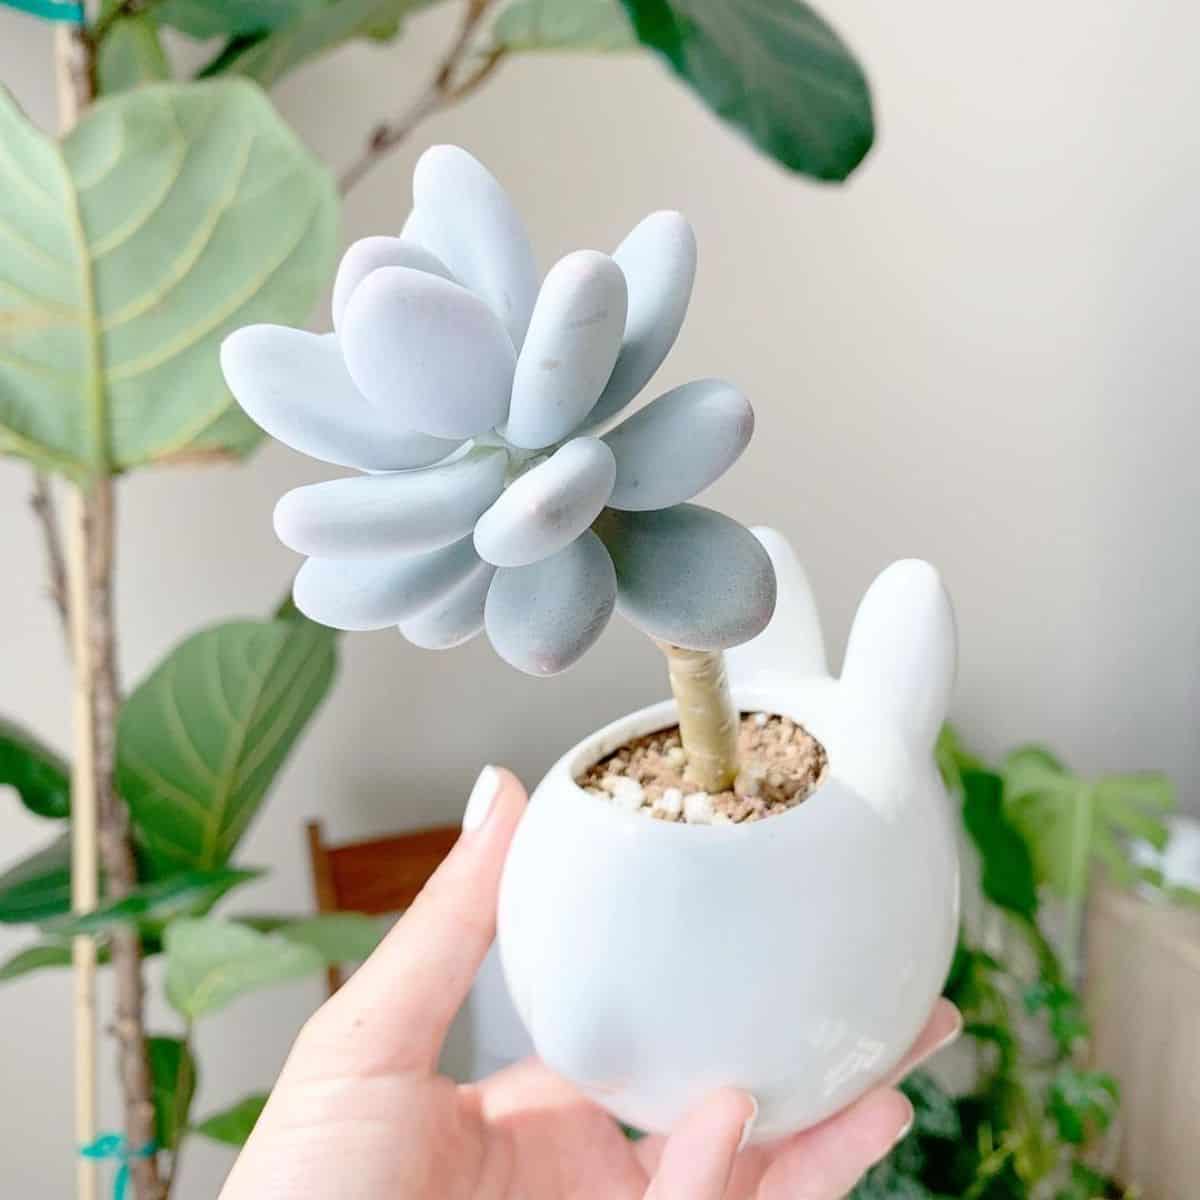 A beautiful Graptopetalum oviferum grows in a white pot held by hand.